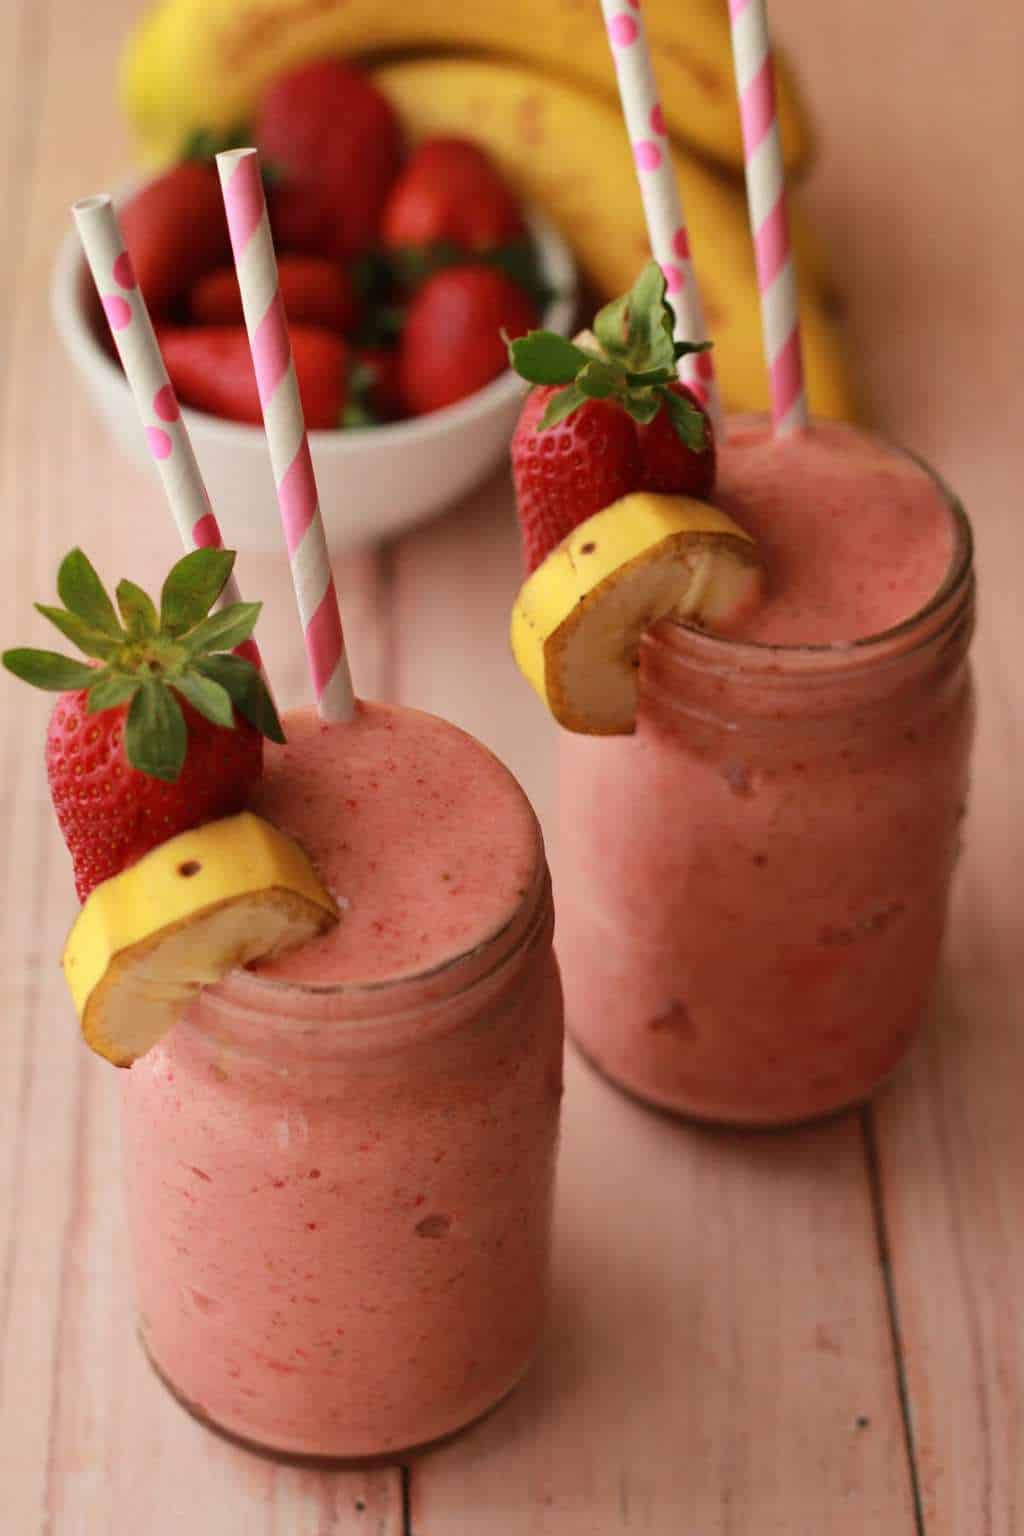 Healthy Smoothie – The Foundation / P4C Cookbook